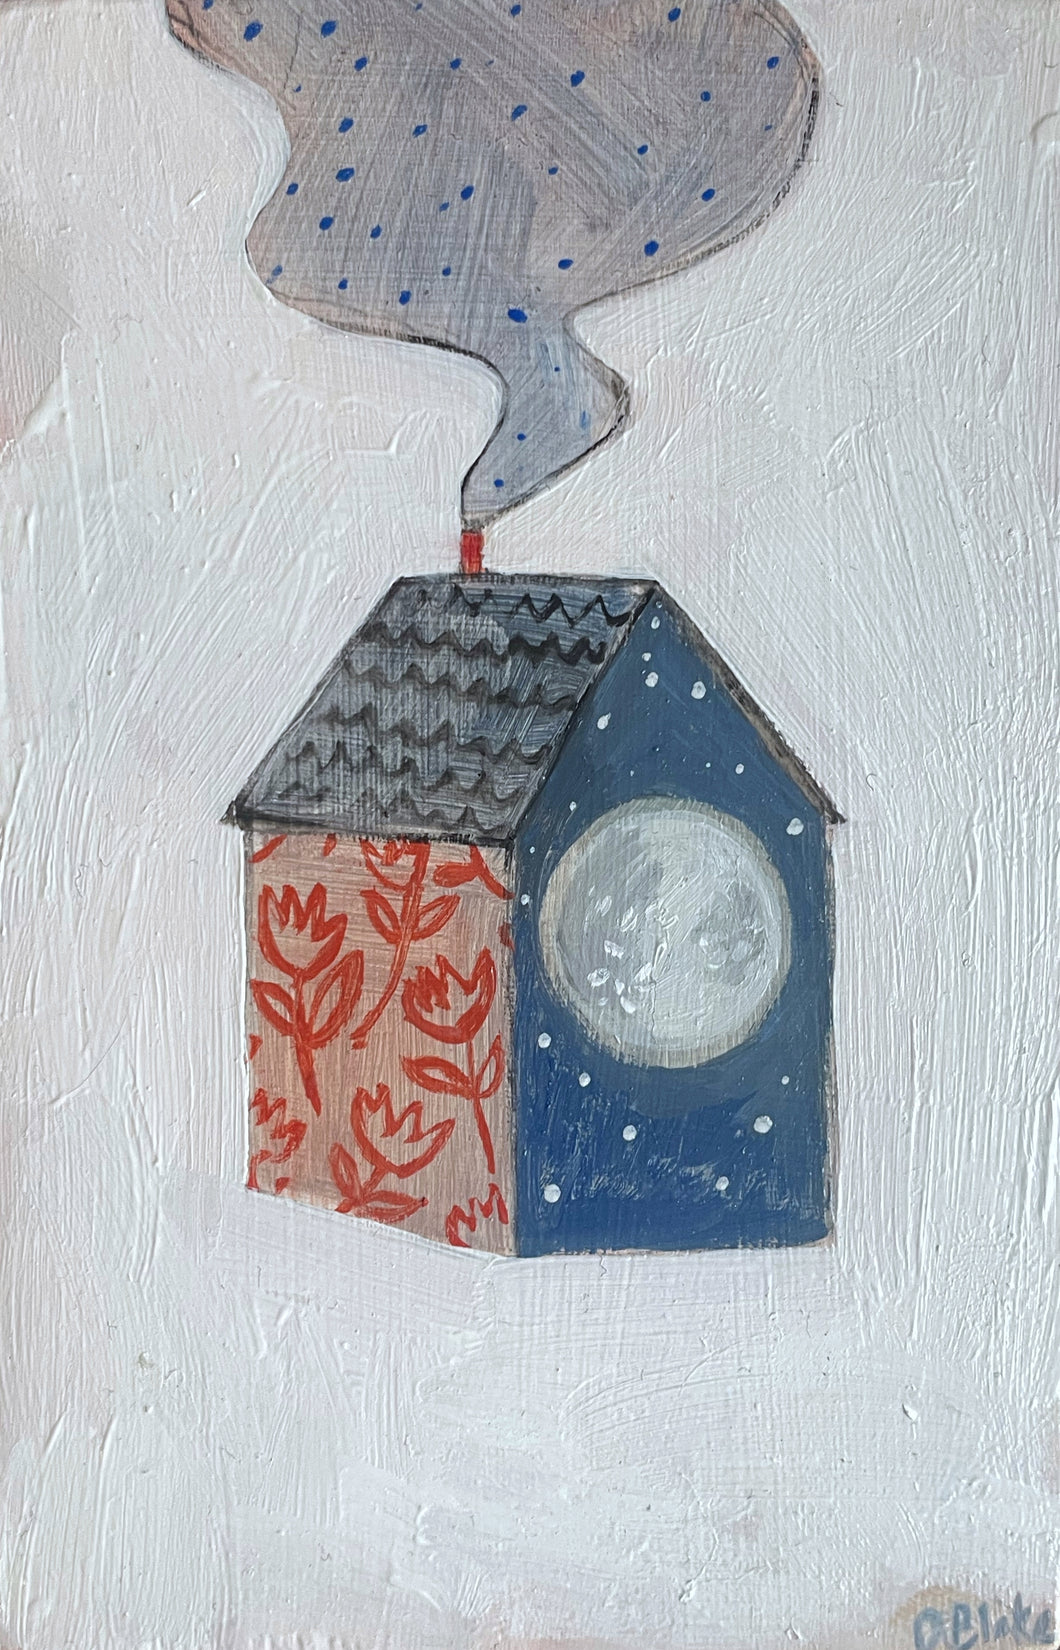 A home made of moonlight and growth